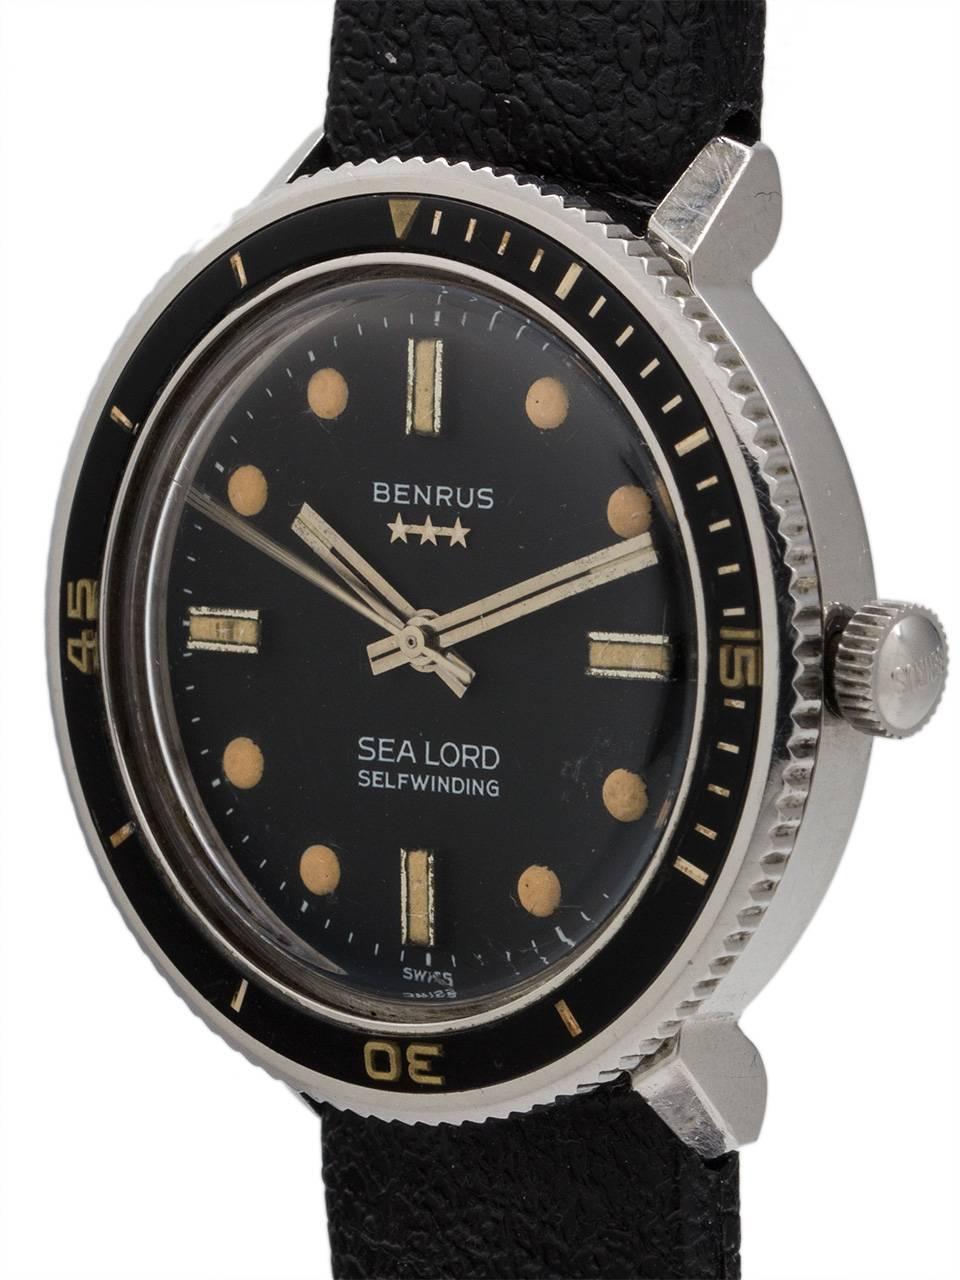 
Benrus stainless steel Sealord diver’s model featuring a 35mm diameter case with black elapsed time bezel, original black dial with large round luminous plots with beautiful warm patina and with silver match stick style hands. Signed Benrus crown.